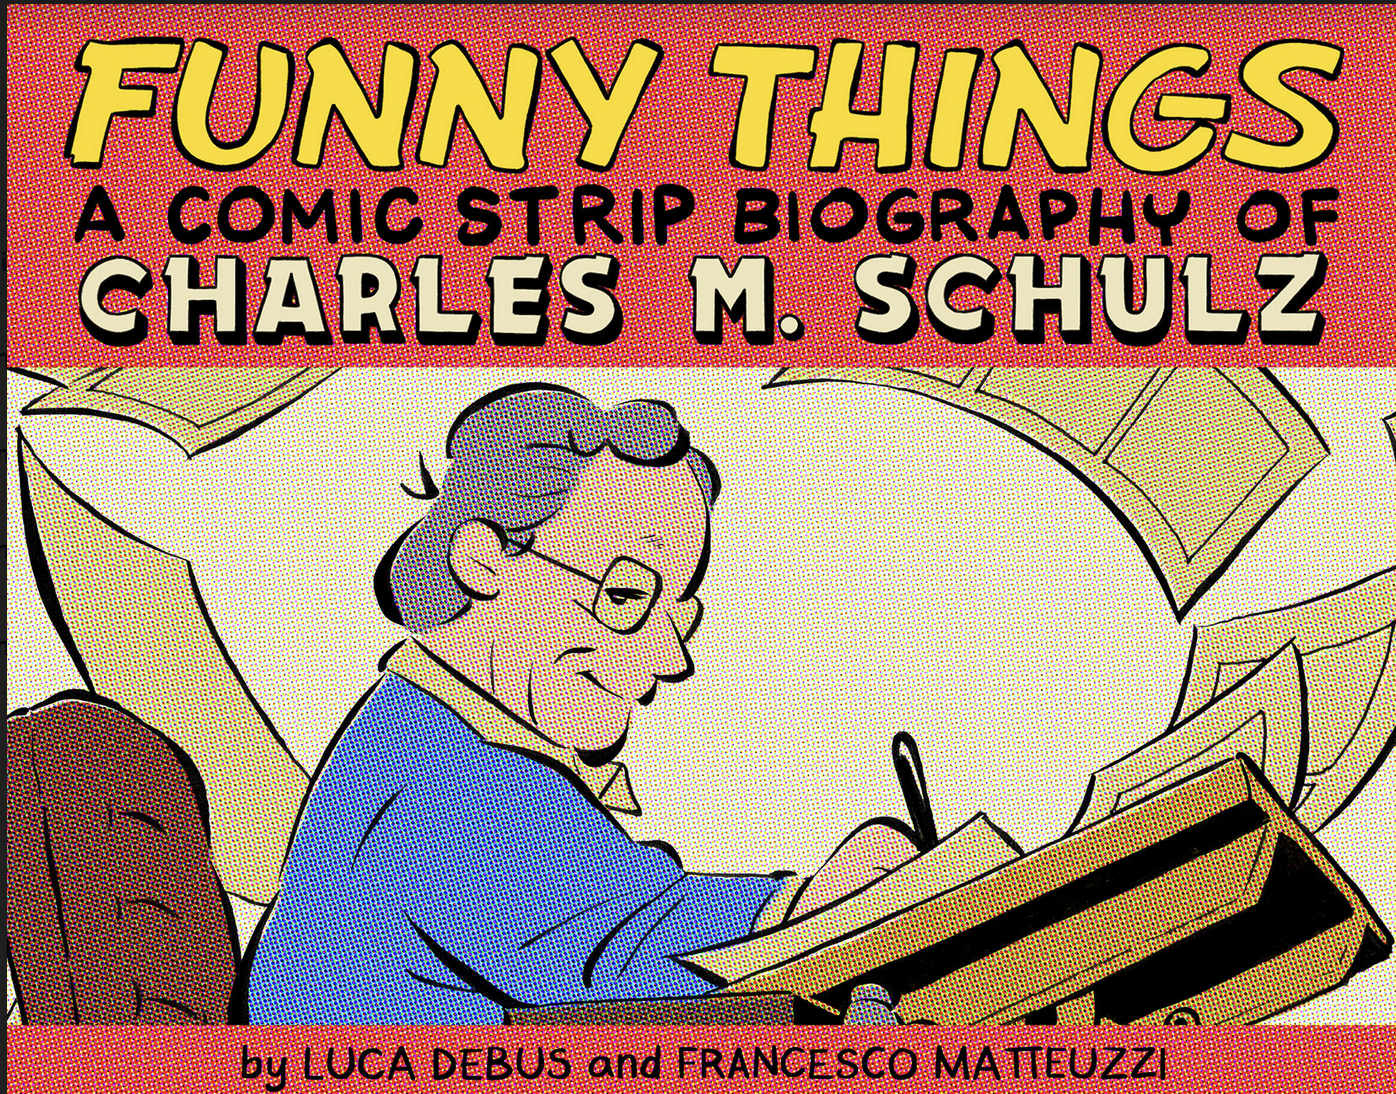 Funny Things: A Comic Strip Biography of Charles M. Schulz by Luca Debus and Francesco Matteuzzi